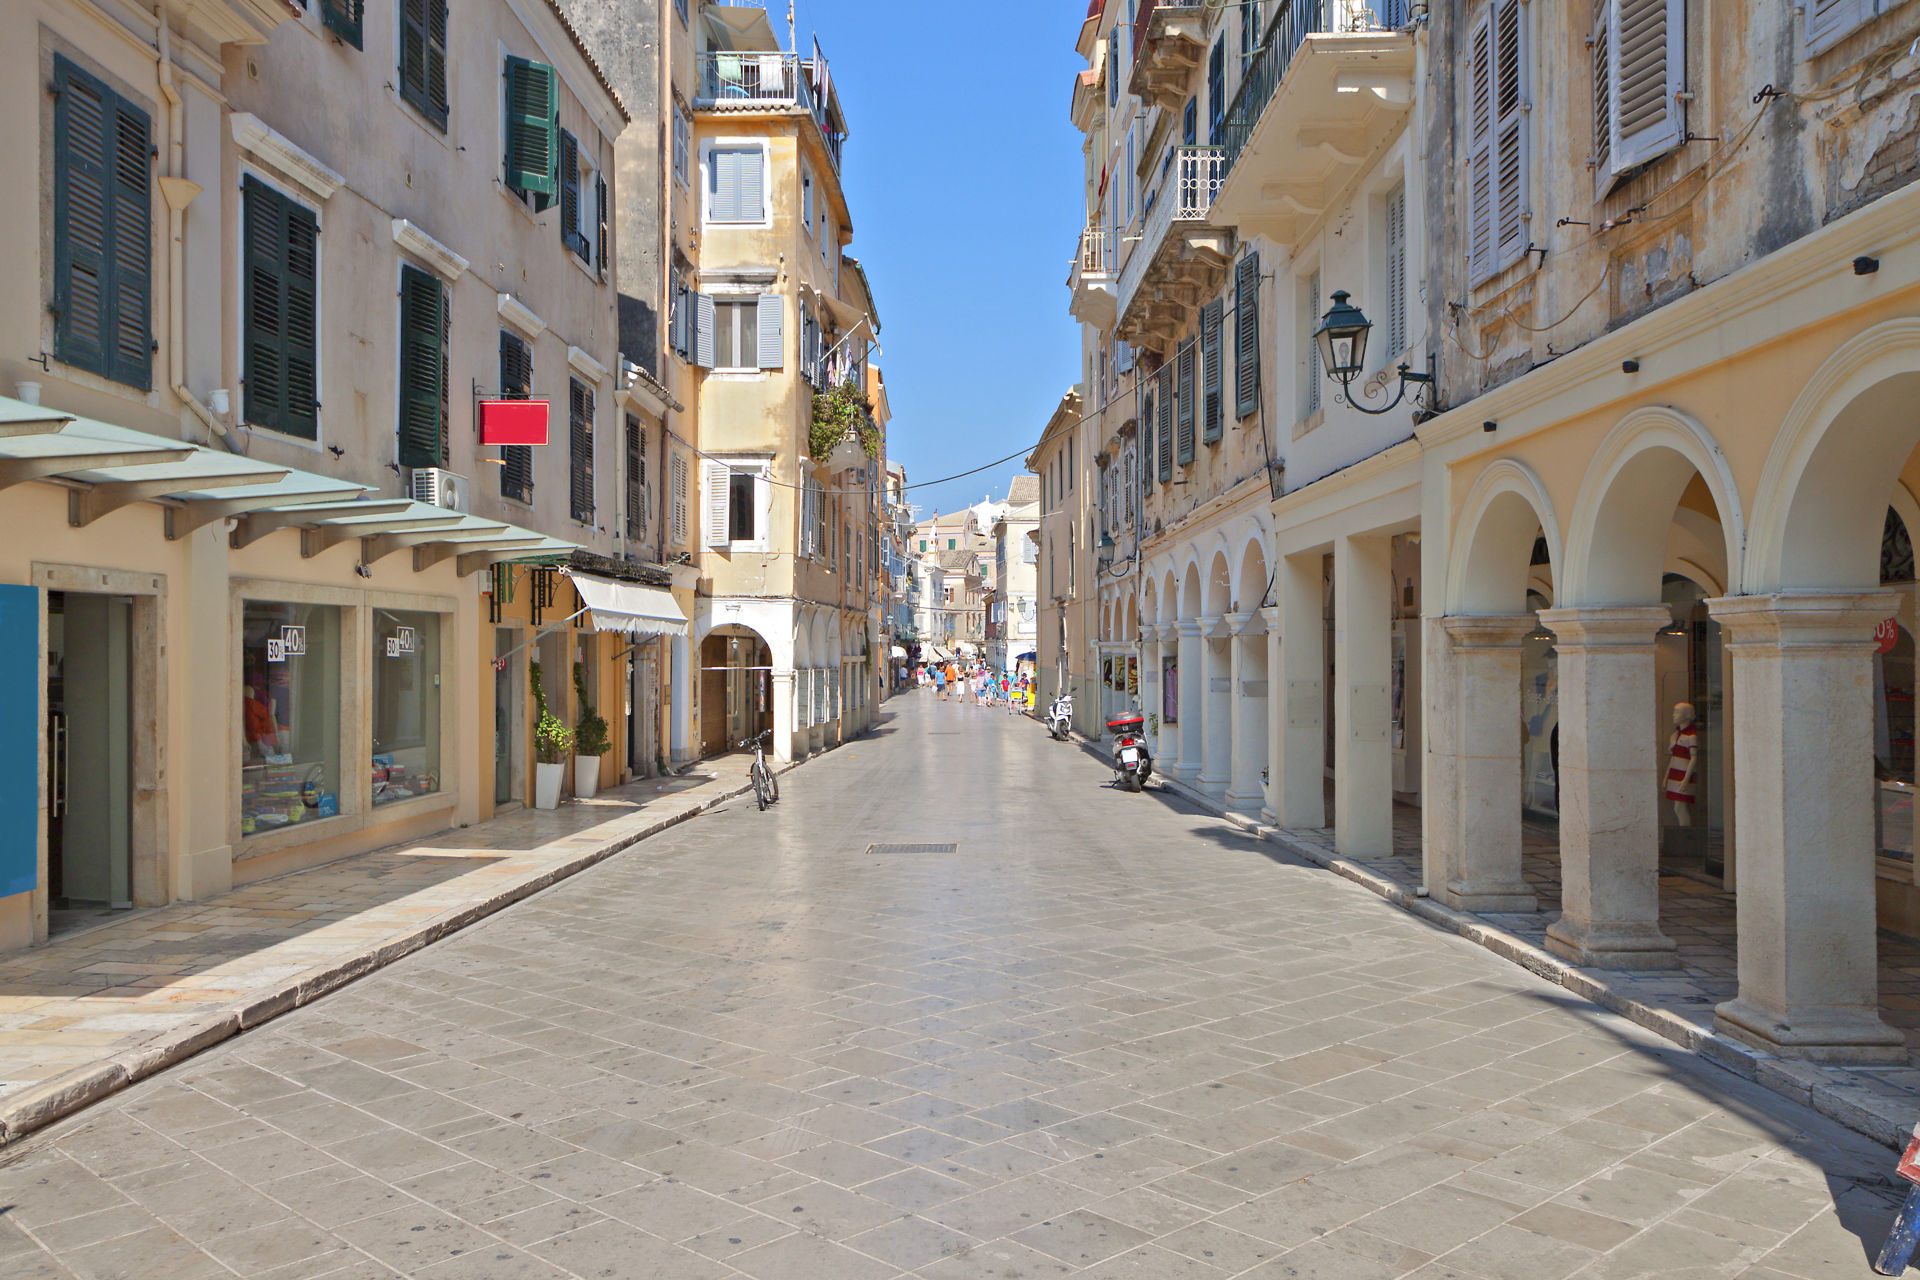 The piazza at the old town